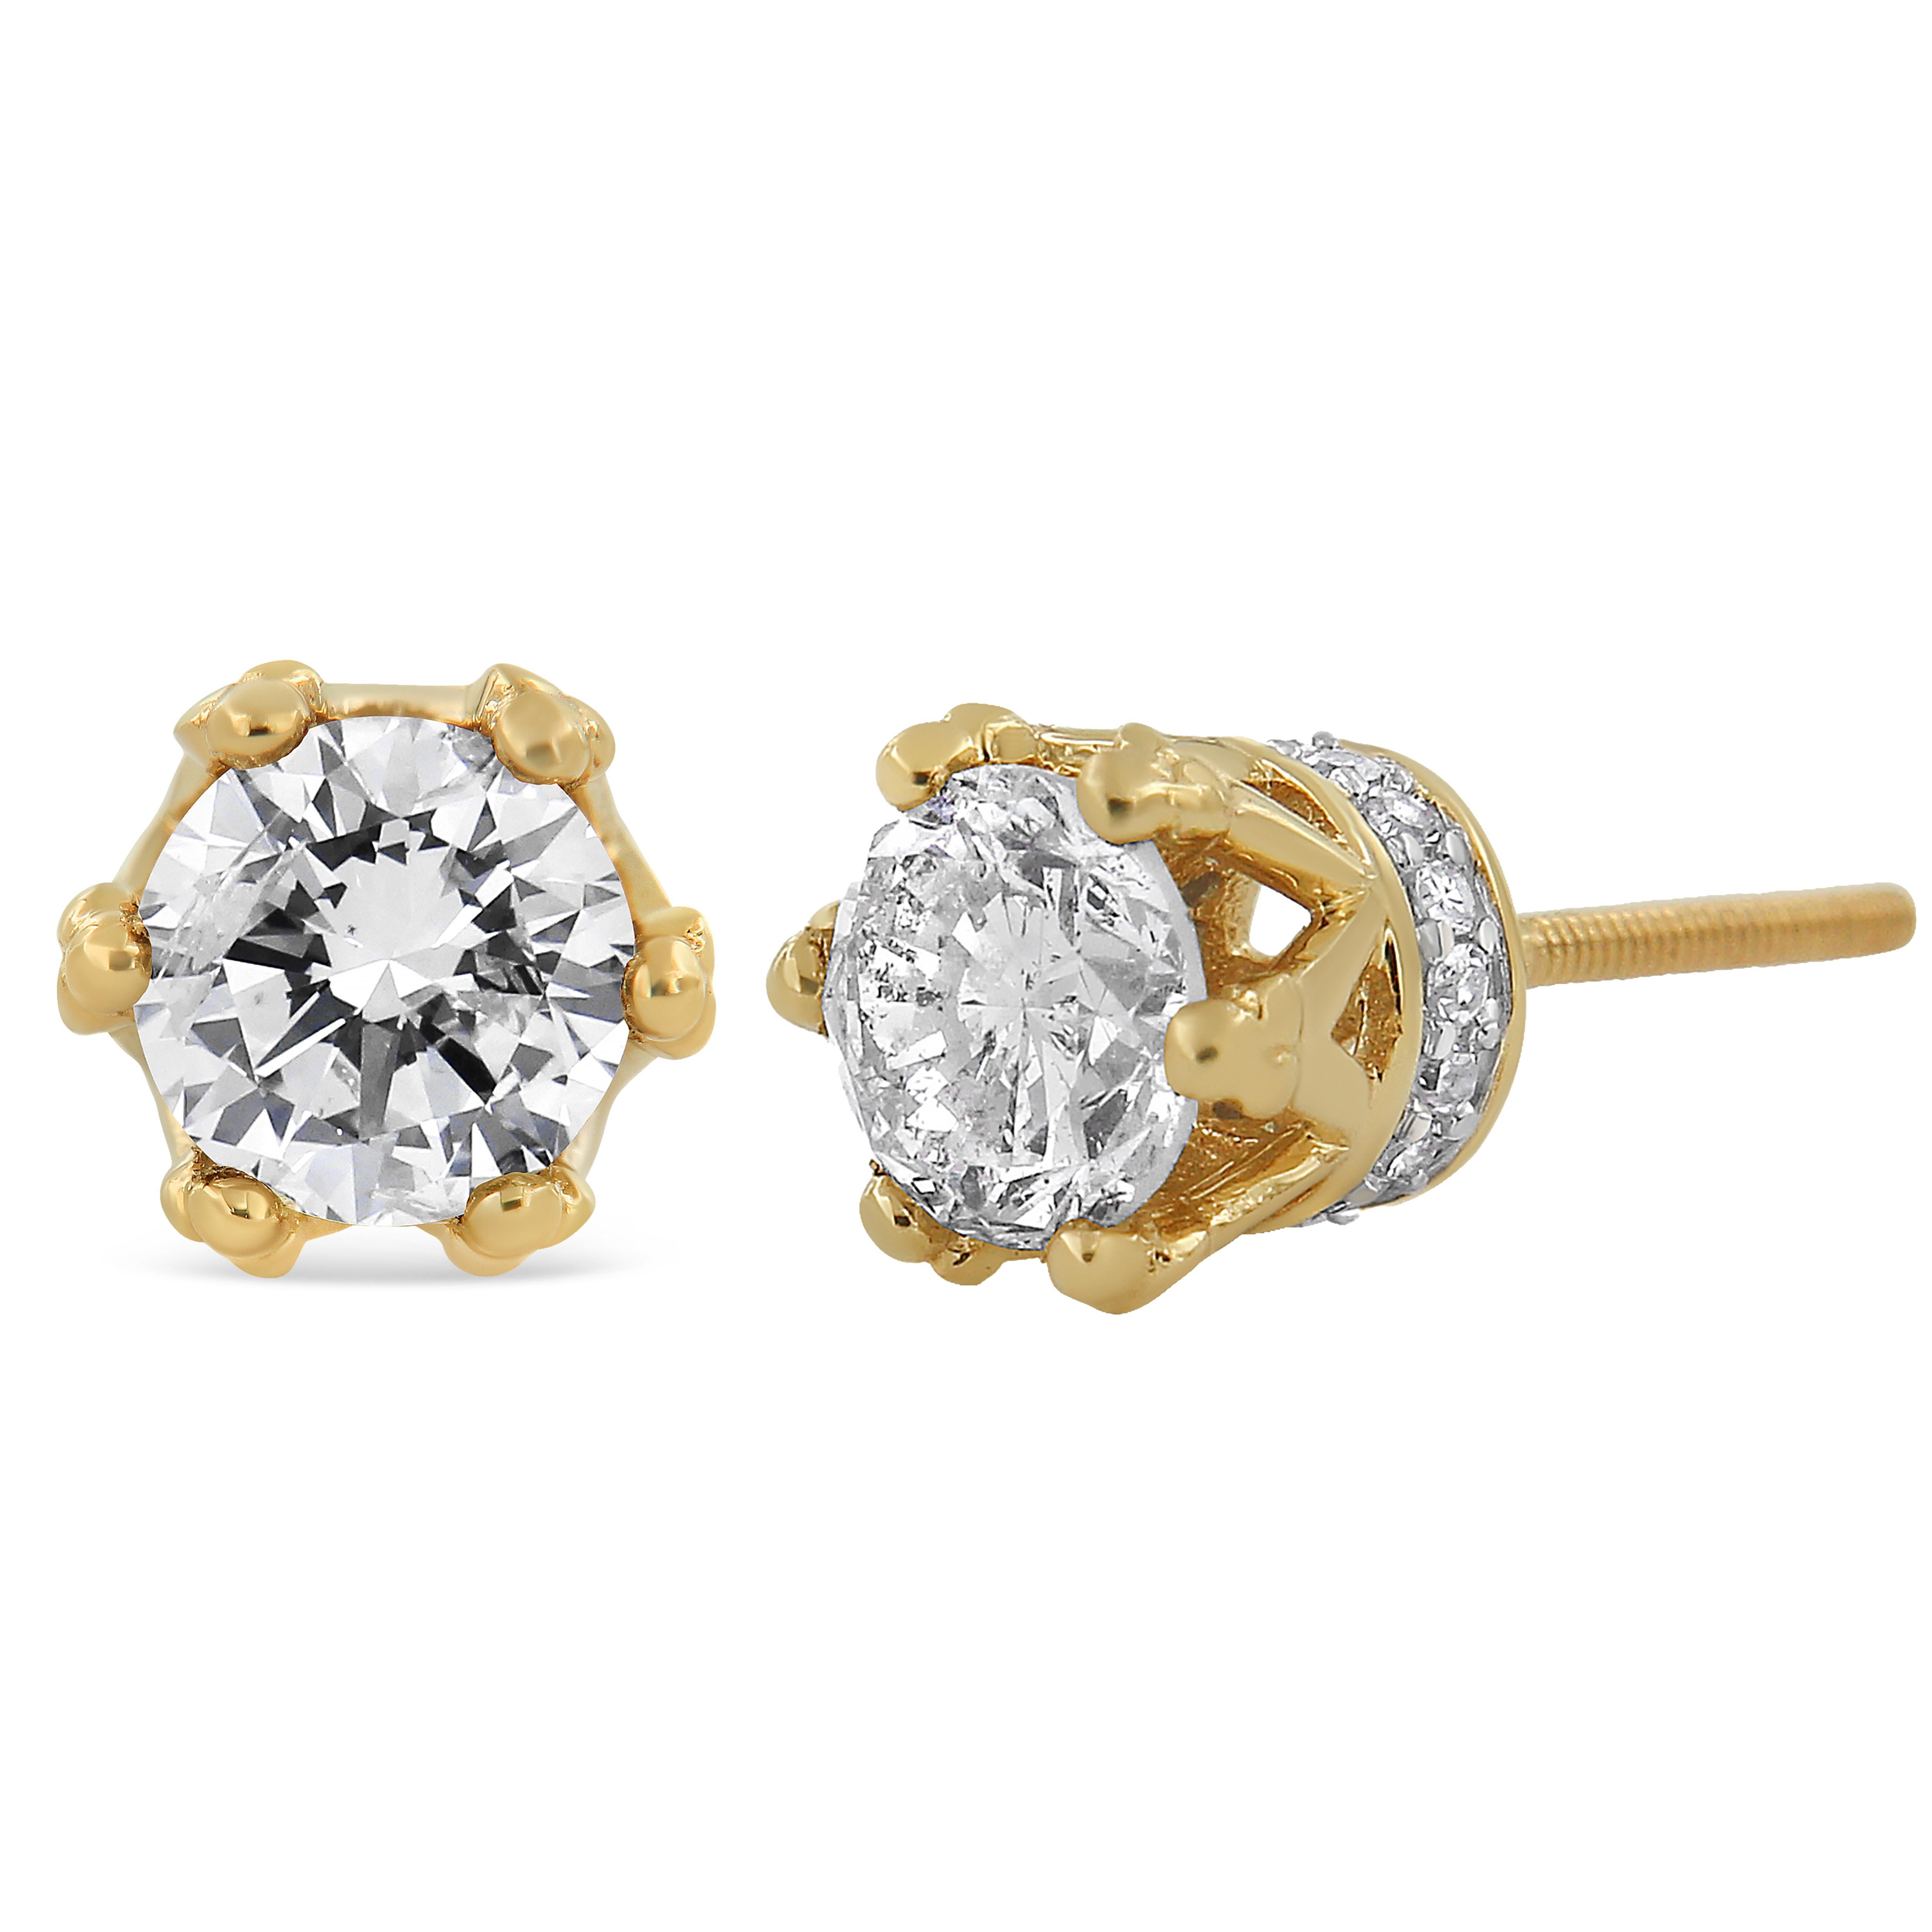 With regal hidden details, these diamond stud earrings are anything but ordinary. From the front, these 14kt yellow gold studs look like solitaires with a multi-prong setting. But the sideview brings into focus the crown design. Round diamond